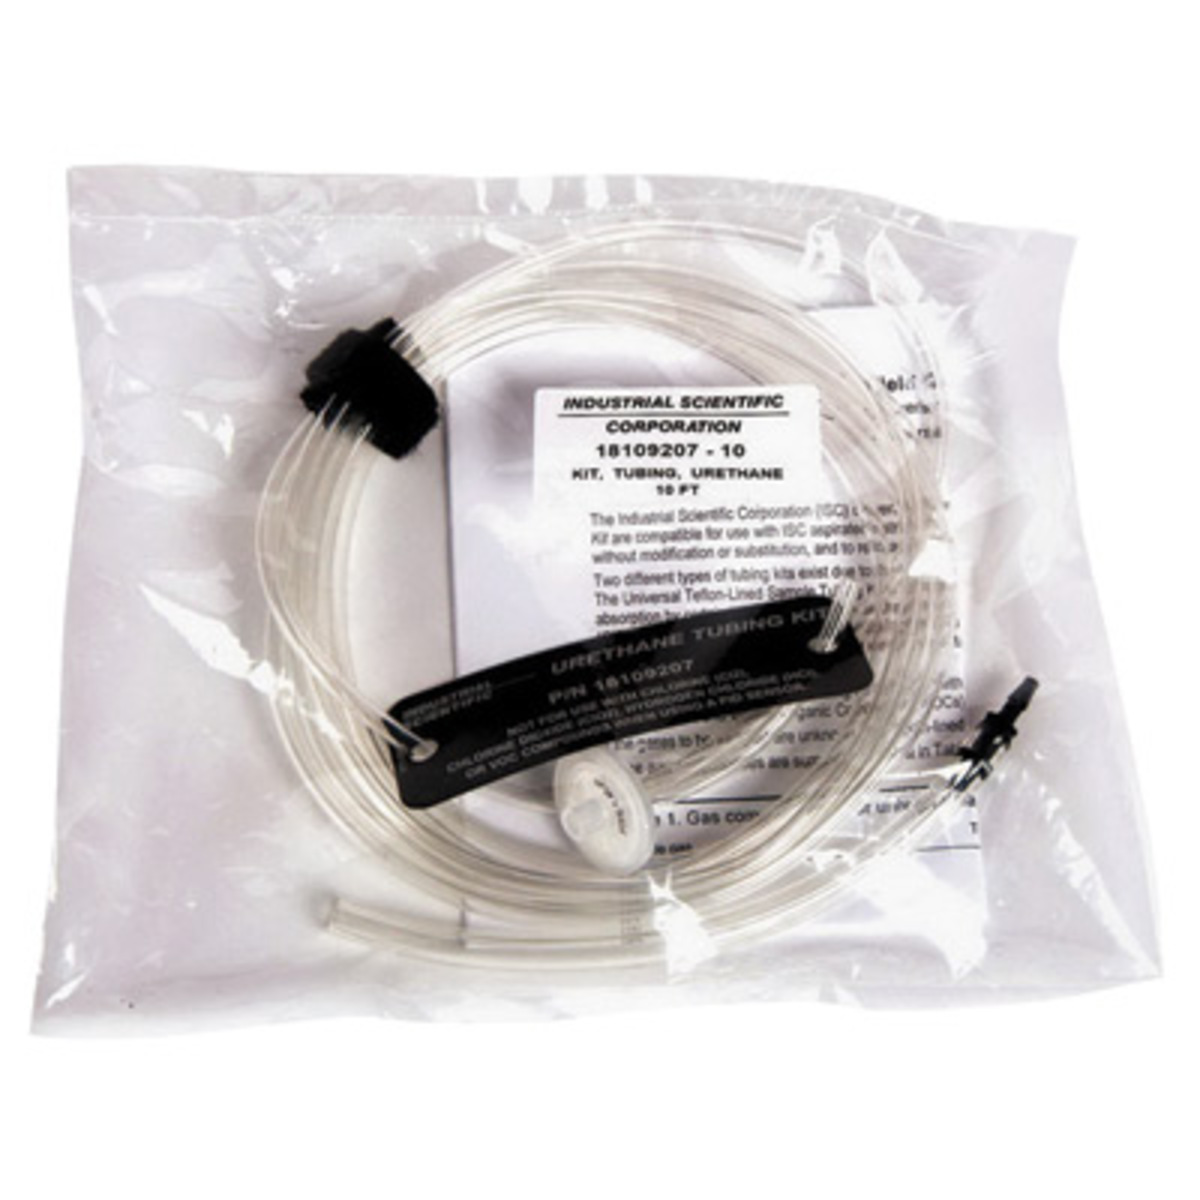 Industrial Scientific 50' Urethane Sampling Tubing/Probe Kit Used With MX6 iBrid™ And Ventis™ MX4 Portable Multi-Gas Monitor